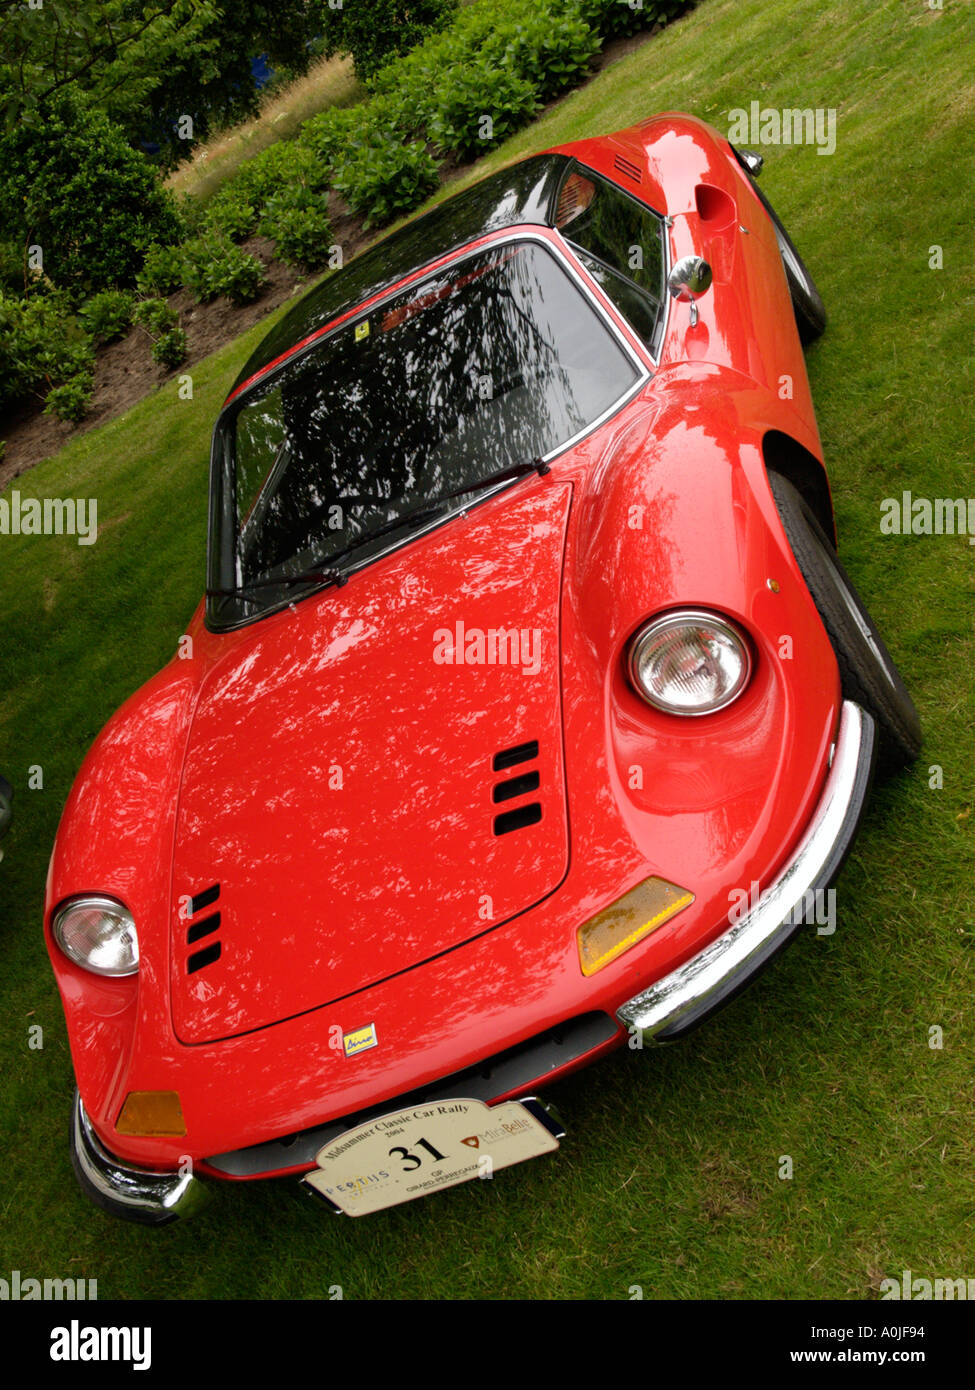 Classic bright red Ferrari Dino 246 GT parked on a grass field with rallye shield attached Stock Photo